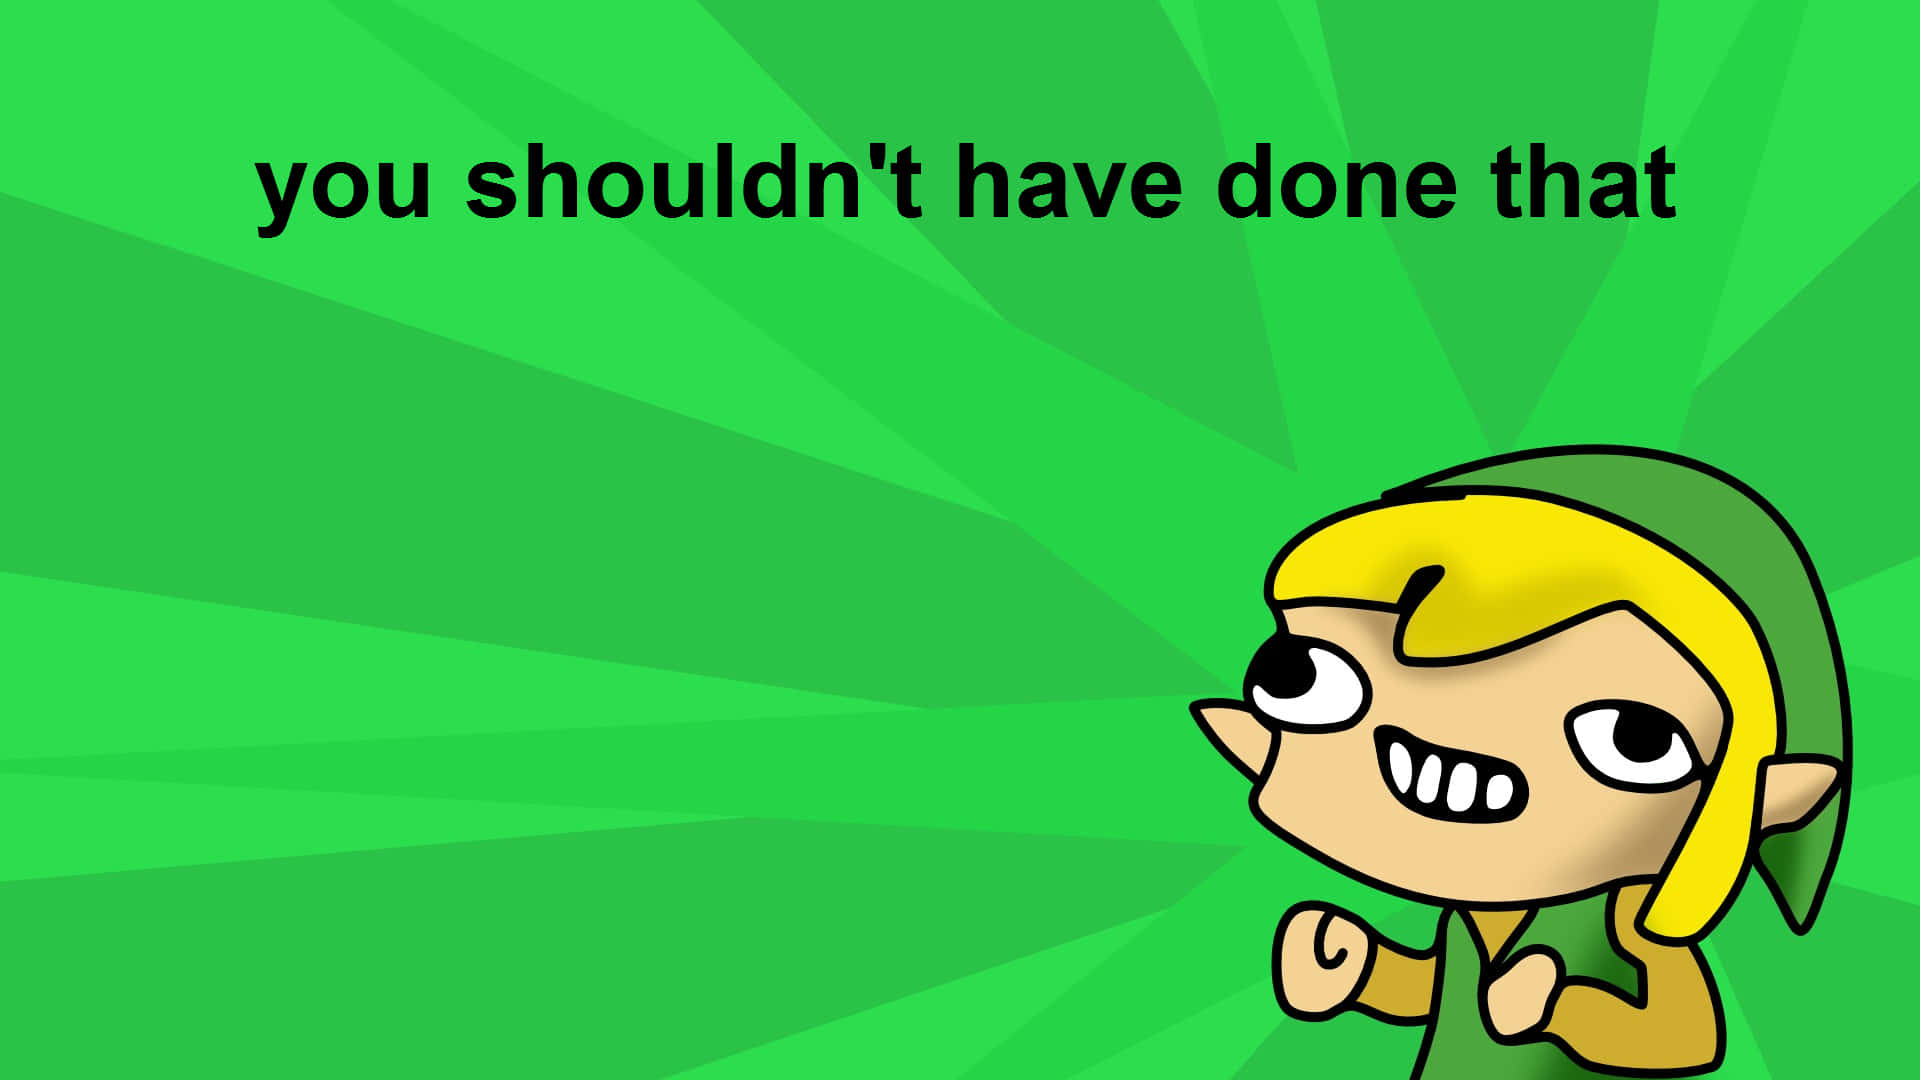 Toon Link Saying You Shouldn't Have Done That Background